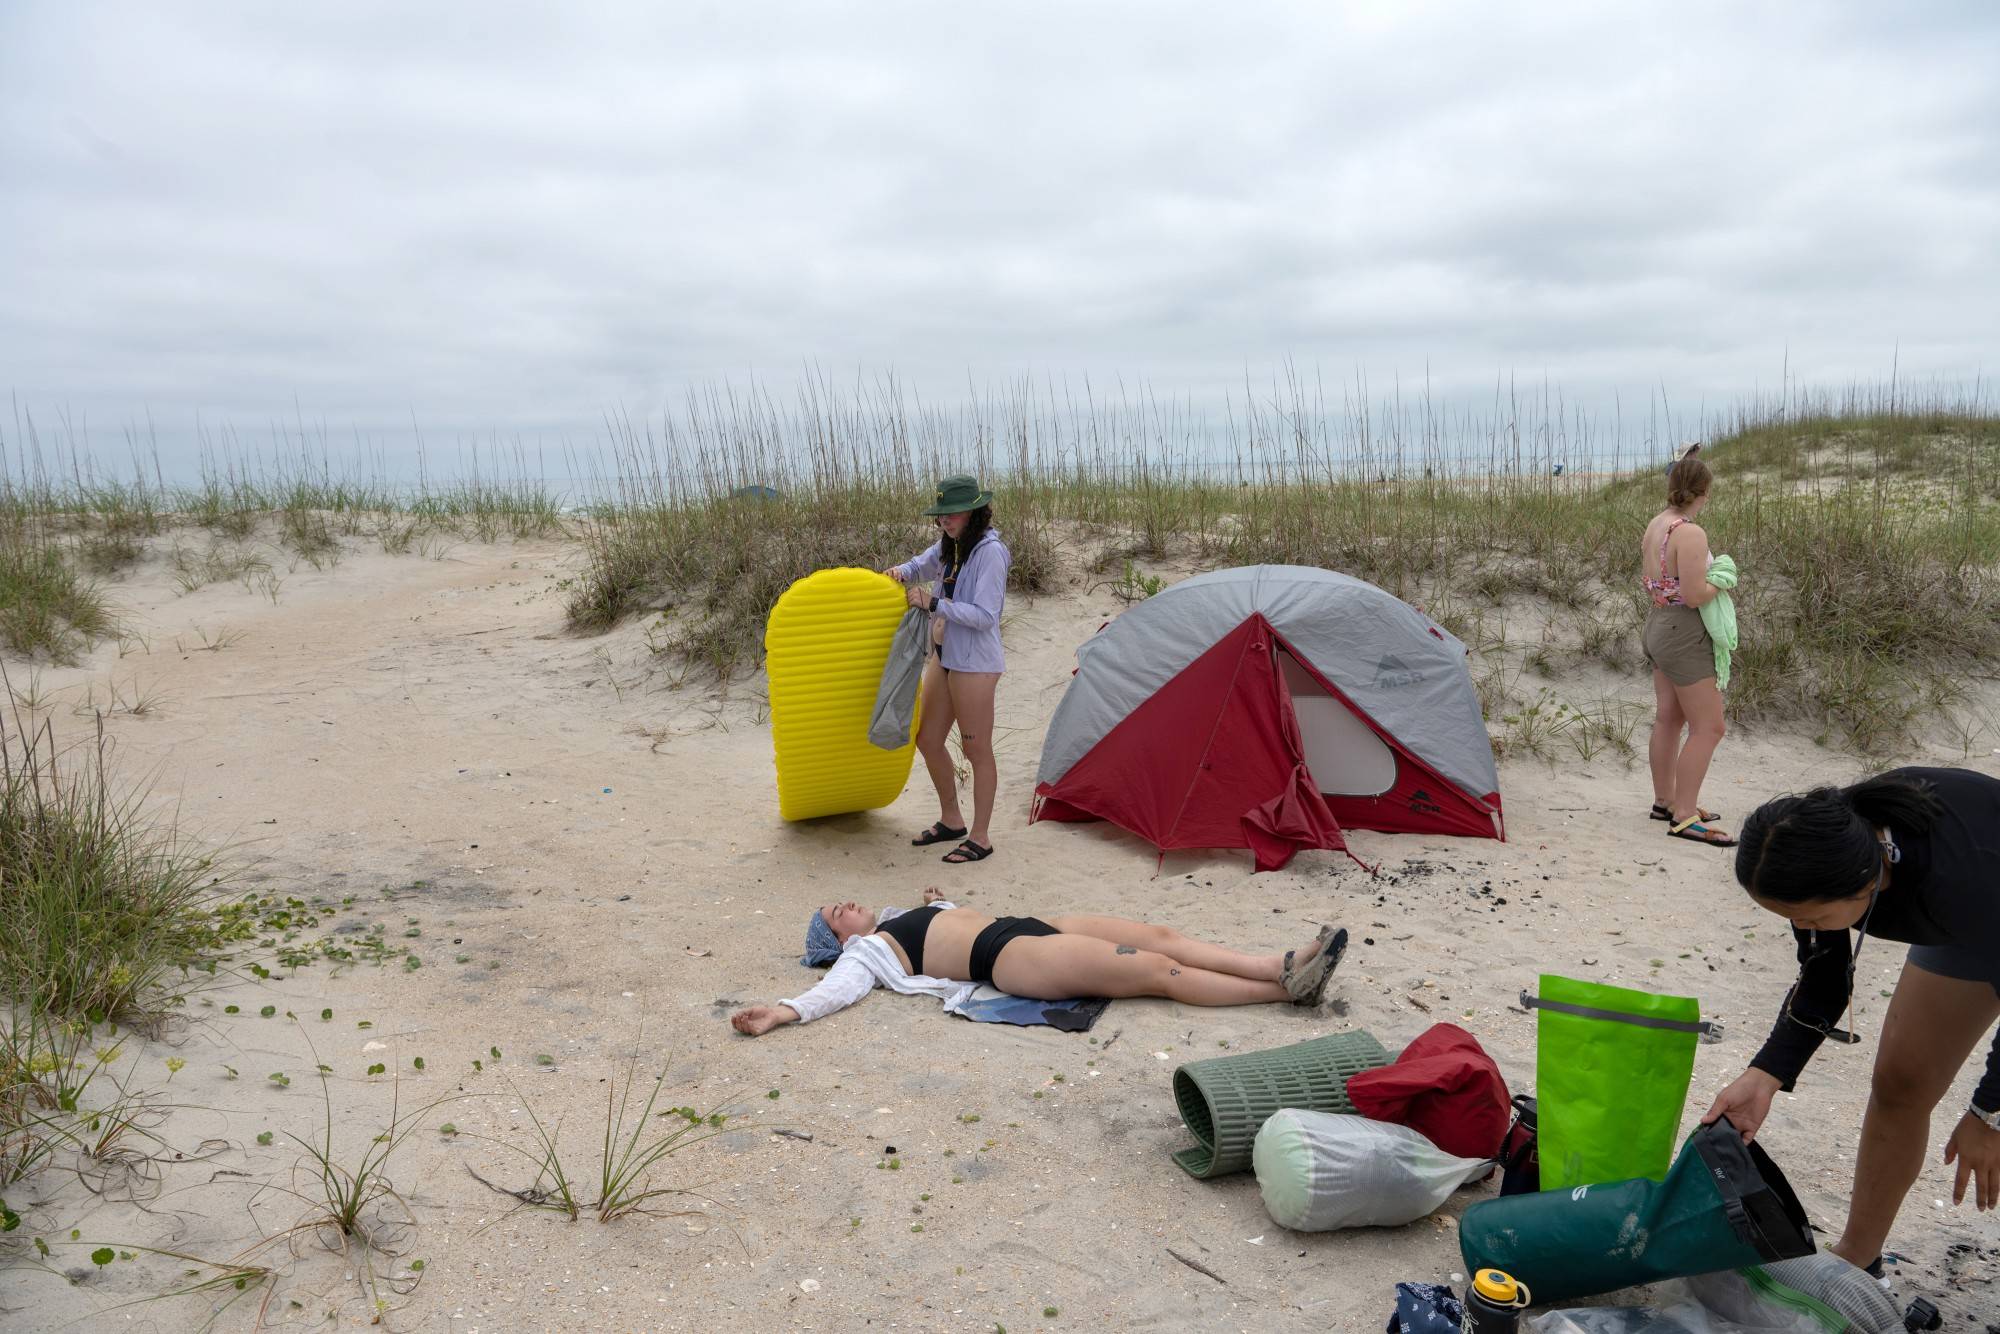 Students camped in the shadow of Cape Lookout Lighthouse on the third night in the Outer Banks. Autumn Warren rests for a moment after pitching her tent on the beach.